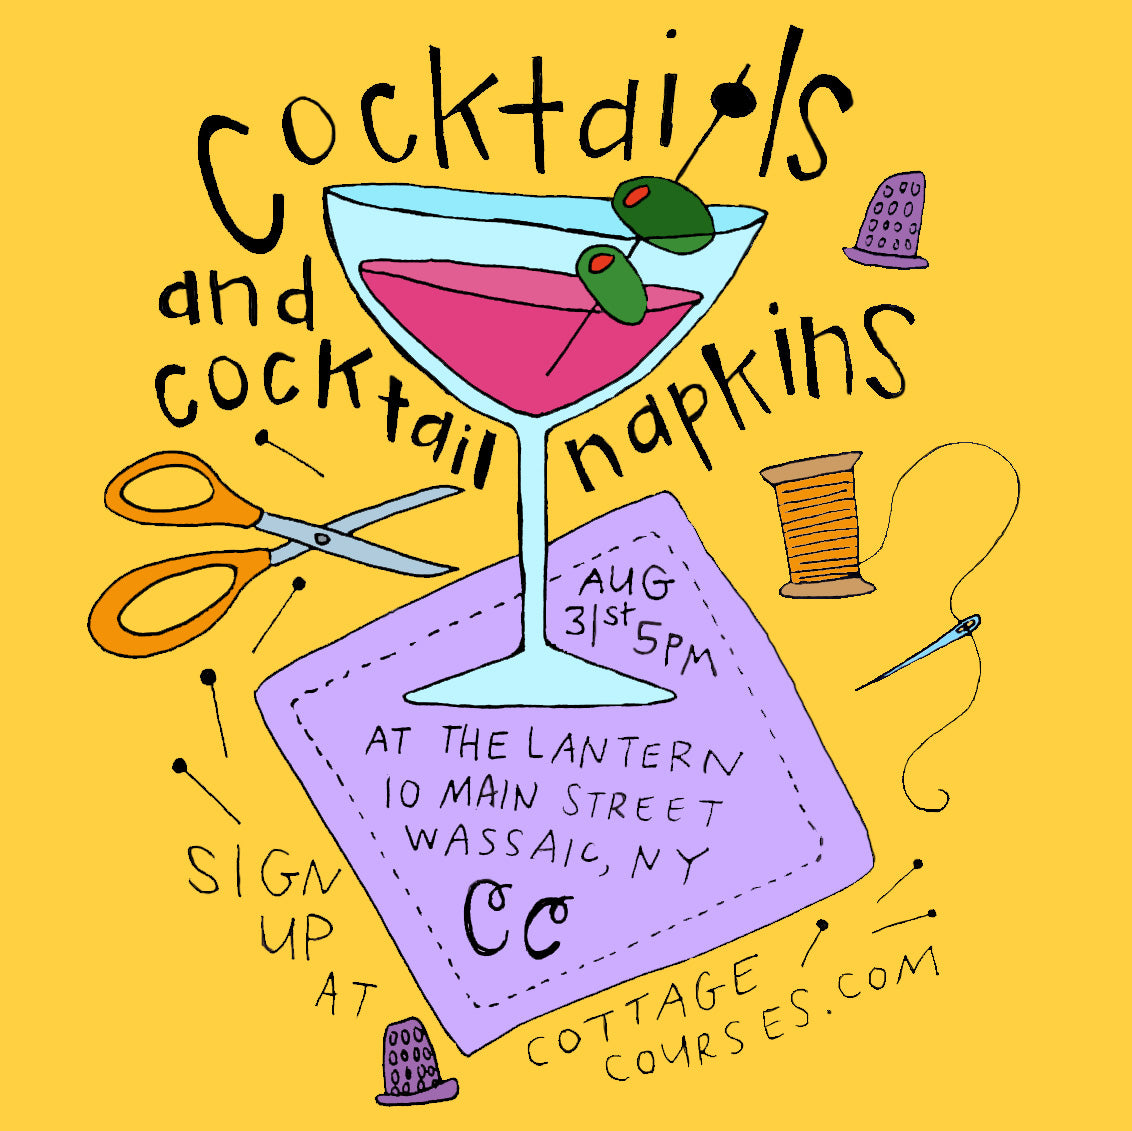 Cocktails & Cocktail Napkins at The Lantern | Aug 31, 5pm